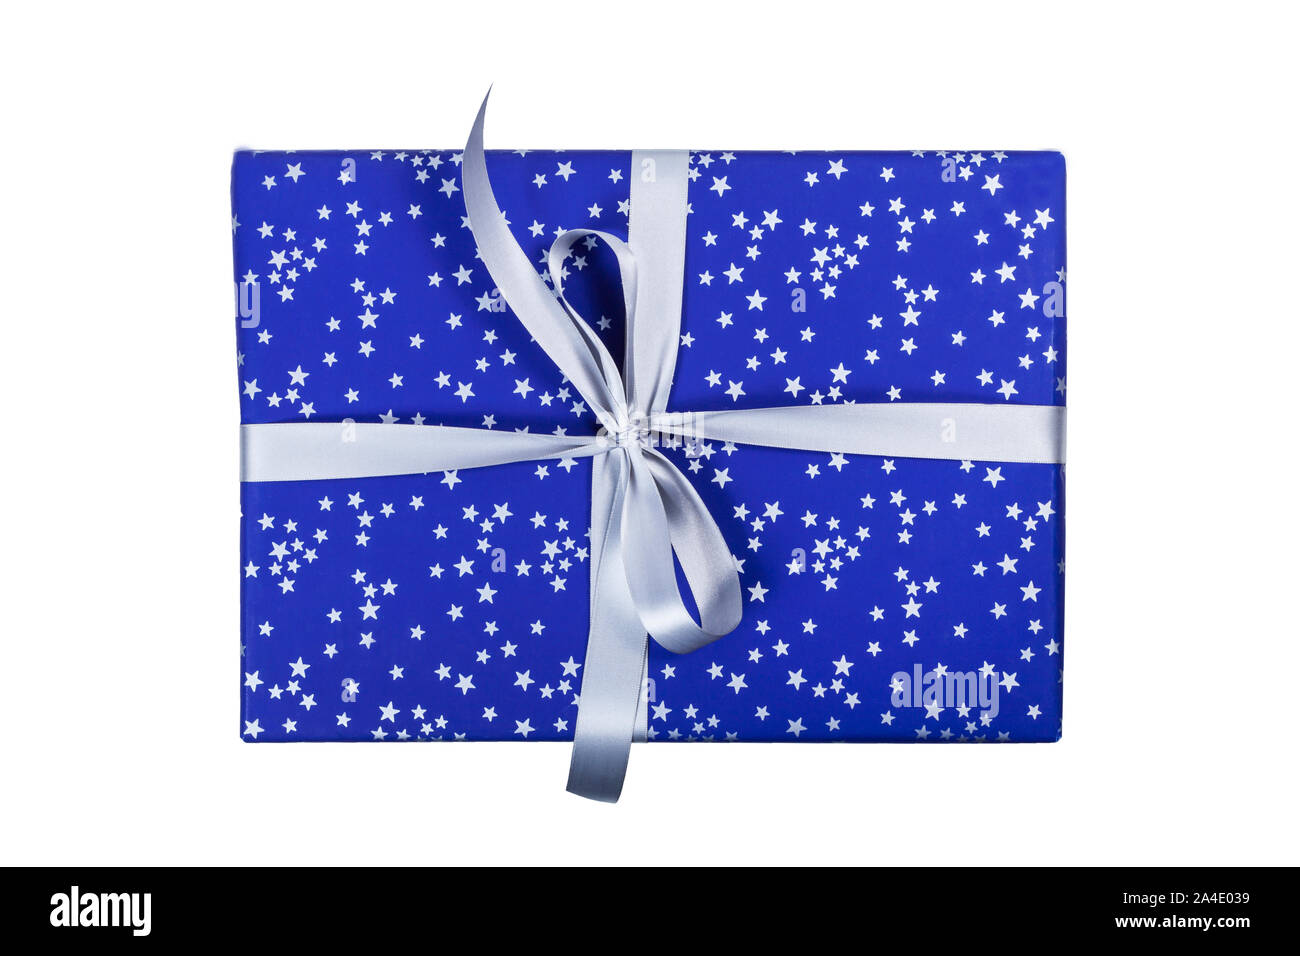 Blue christmas present with silver stars on white background Stock Photo